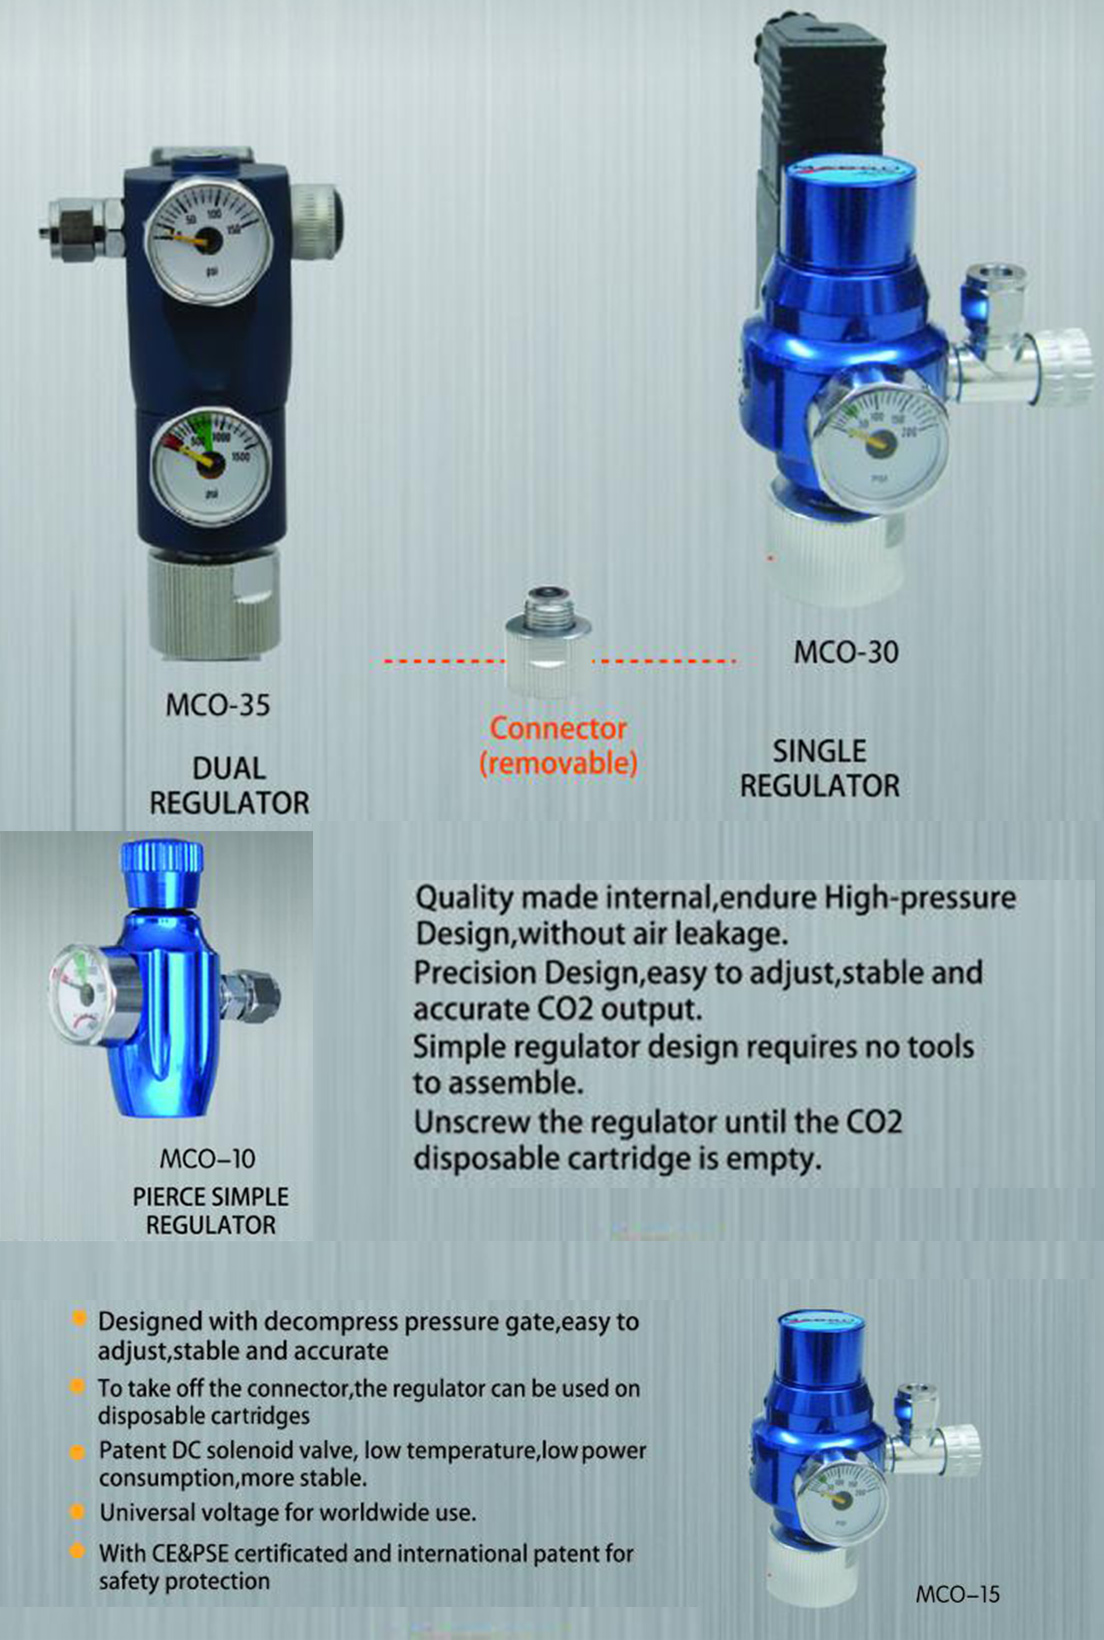 CO2 products